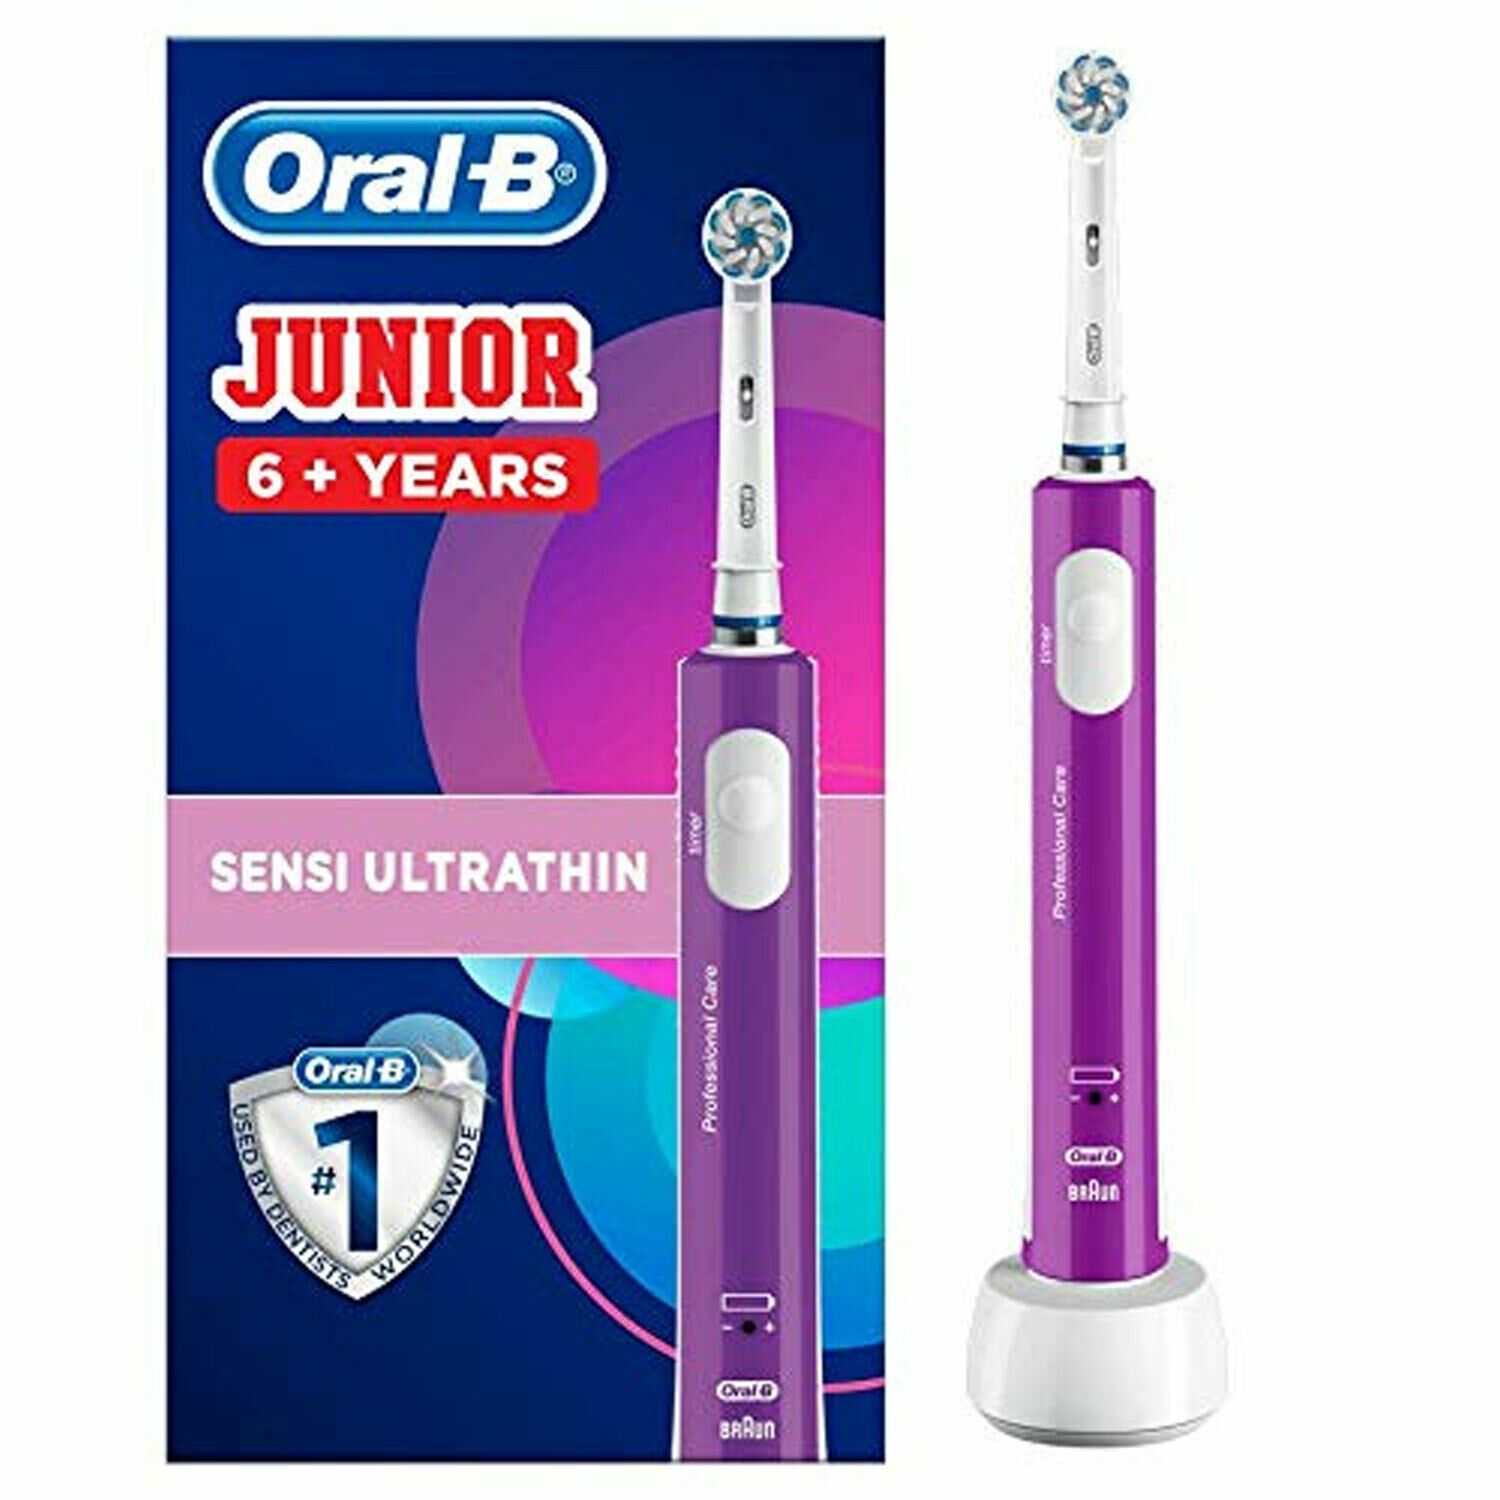 Oral-B Junior Kids Electric Toothbrush Rechargeable for Children Aged 6+ Purple

    Better habits, cleaner teeth and fun colours make brushing fun for children aged 6+
    Brushing timer teaches children to brush the Dentist-recommended 2 minutes
    Round head removes more plaque than a manual toothbrush
    Extra soft bristles that are clinically proven to be gentle on teeth and gums
    Rechargeable battery lasts up to 7 days on a single charge
    Oral-B, the #1 brand used by Dentists worldwide, approved by the Oral Health Foundation
    Content: One purple handle with a 2 pin UK plug, one sensitive clean toothbrush head and bathroom brushing guide

Oral-B Junior 6+ Sensi UltraThin Toothbrush

Encourages healthy habits
The colourful Oral-B Junior 6+ electric toothbrush can motivate kids to build healthy habits. This rechargeable brush has extra-soft bristles, clinically proven to be gentle on young teeth and gums while removing more plaque than a manual toothbrush. The built-in timer teaches kids to brush for the dentist-recommended 2 minutes. The Oral-B Junior 6+ comes with a brushing guide to help kids clean their teeth.

2-minute Timer
The built-in timer teaches children to brush the Dentist-recommended 2 minutes.
	
Cleans Better* & Protects From Cavities
The round head removes more plaque than a manual toothbrush and helps protect against cavities.

*than a manual toothbrush
	
Extra-soft Bristles
Extra-soft bristles that are clinically proven to be gentle on teeth and gums.
	
Battery For Up To 10 Days


Steps for cleaner teeth

Hold � don�t scrub: Guide the brush head slowly from tooth to tooth, spending a few seconds on each one.
Don�t press too hard: Your brush does the work so you don�t need to.
Brush for 2 minutes: Spend 30 seconds on each quadrant of your mouth. Your brush will buzz when it�s time to move on.
Brush twice a day: Don�t forget to brush twice a day, every day. In the morning and in the evening.

Not Available for the following postcodes:
AB, BT, DB99, DD9-11, EH35-46, FK18-21, AB, BT, DB99, GY, HS, IM, IV, KA27, KA28, KW, KY9-16, PA, PH, PO30-41, TD, TR21-25, ZE